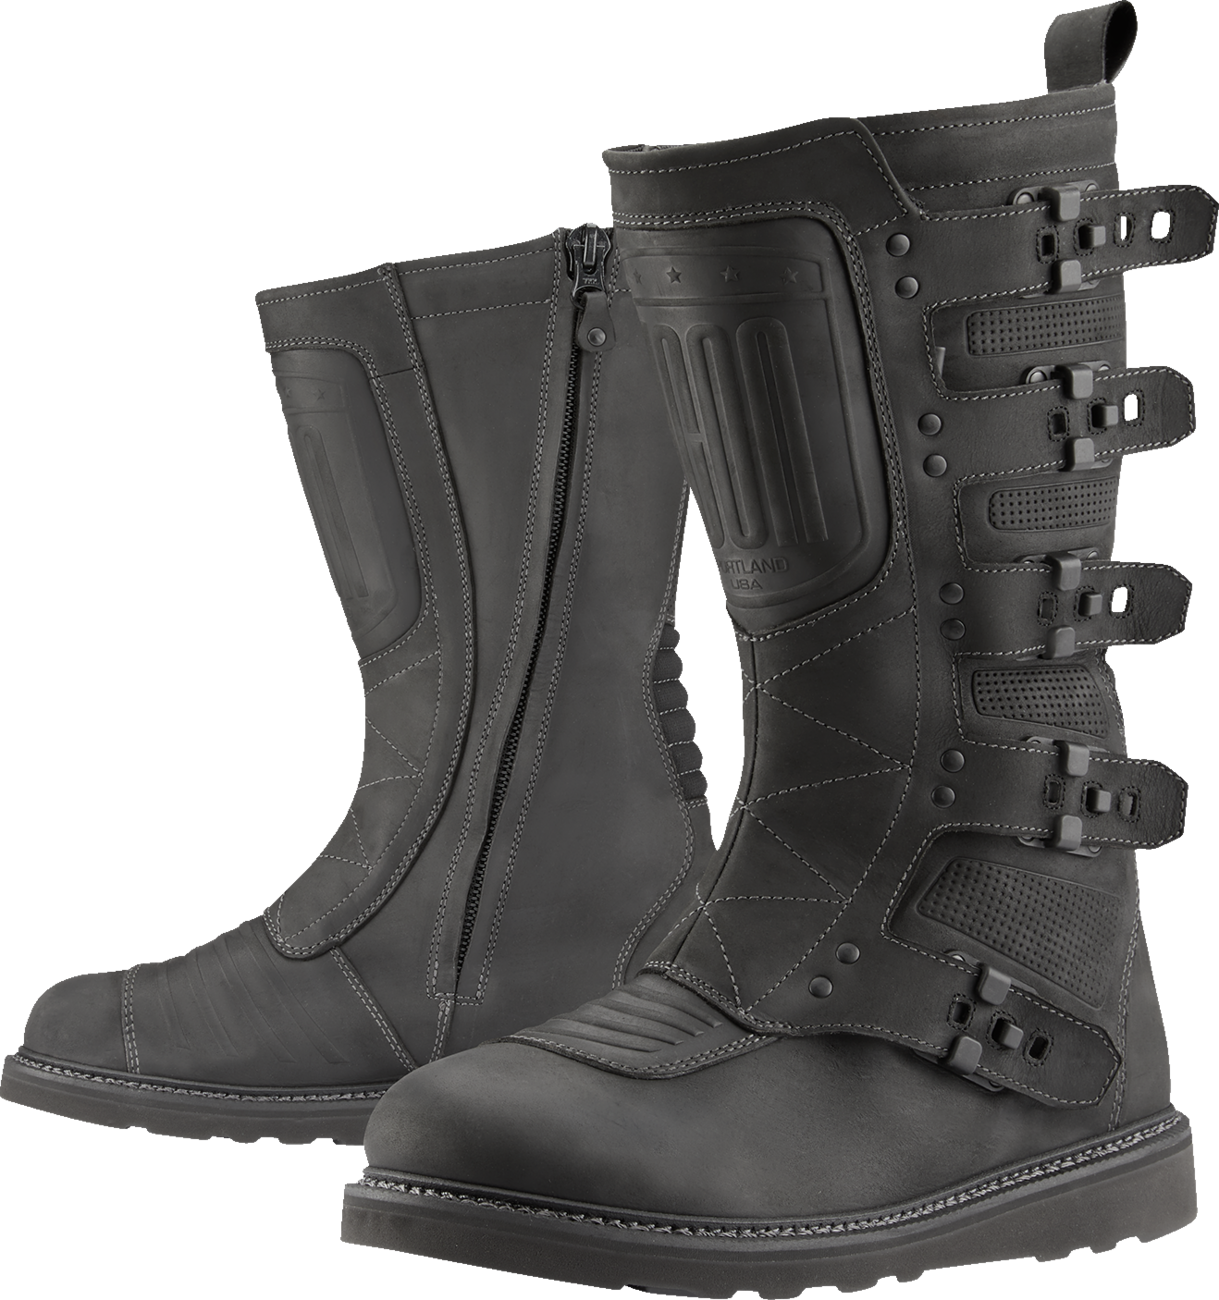 ICON Elsinore 2™ CE Boots - Black - Size 9.5 3403-1212